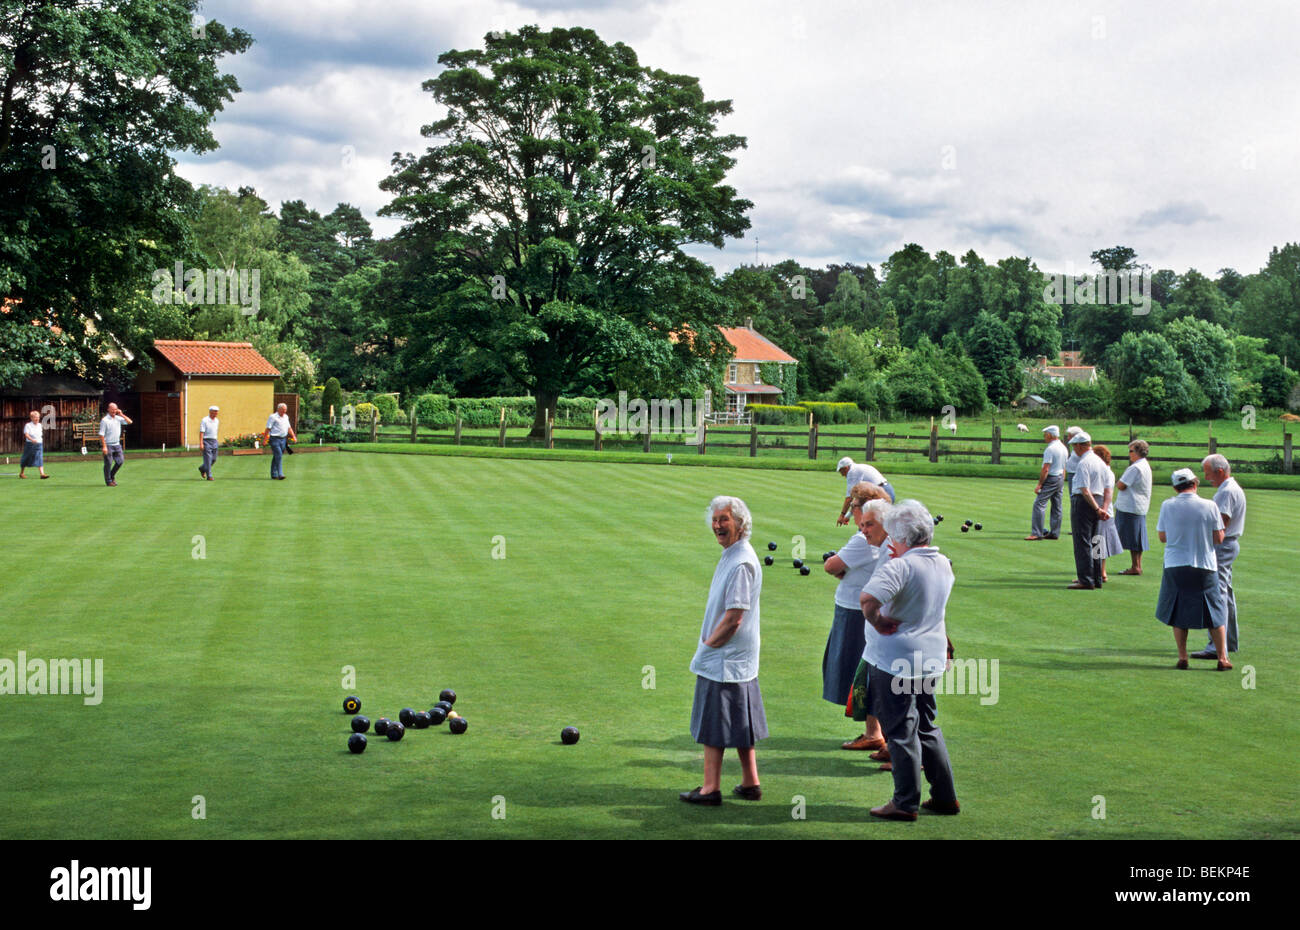 Elderly people playing lawn bowls tournament in Yorkshire, England, UK Stock Photo